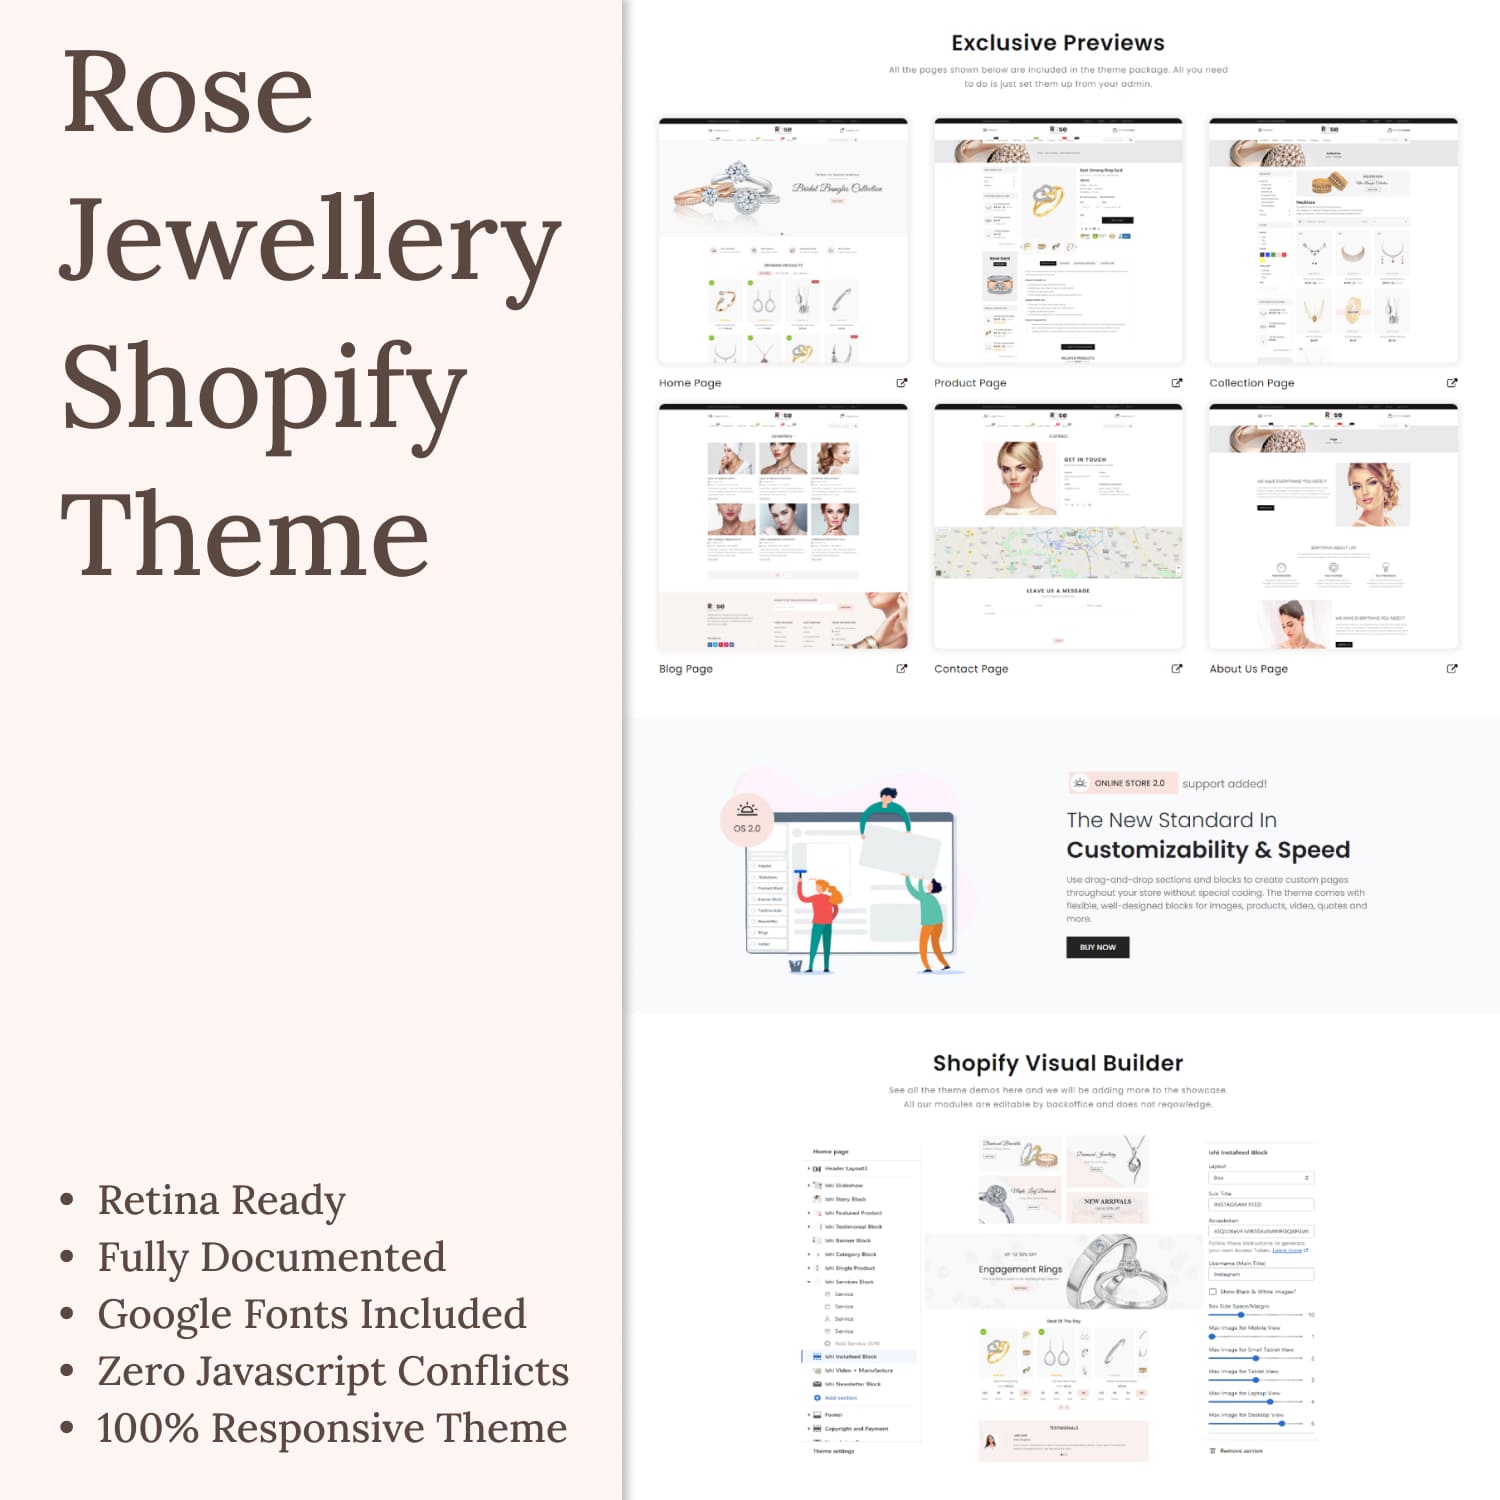 Rose jewellery shopify theme, first picture 1500x1500.